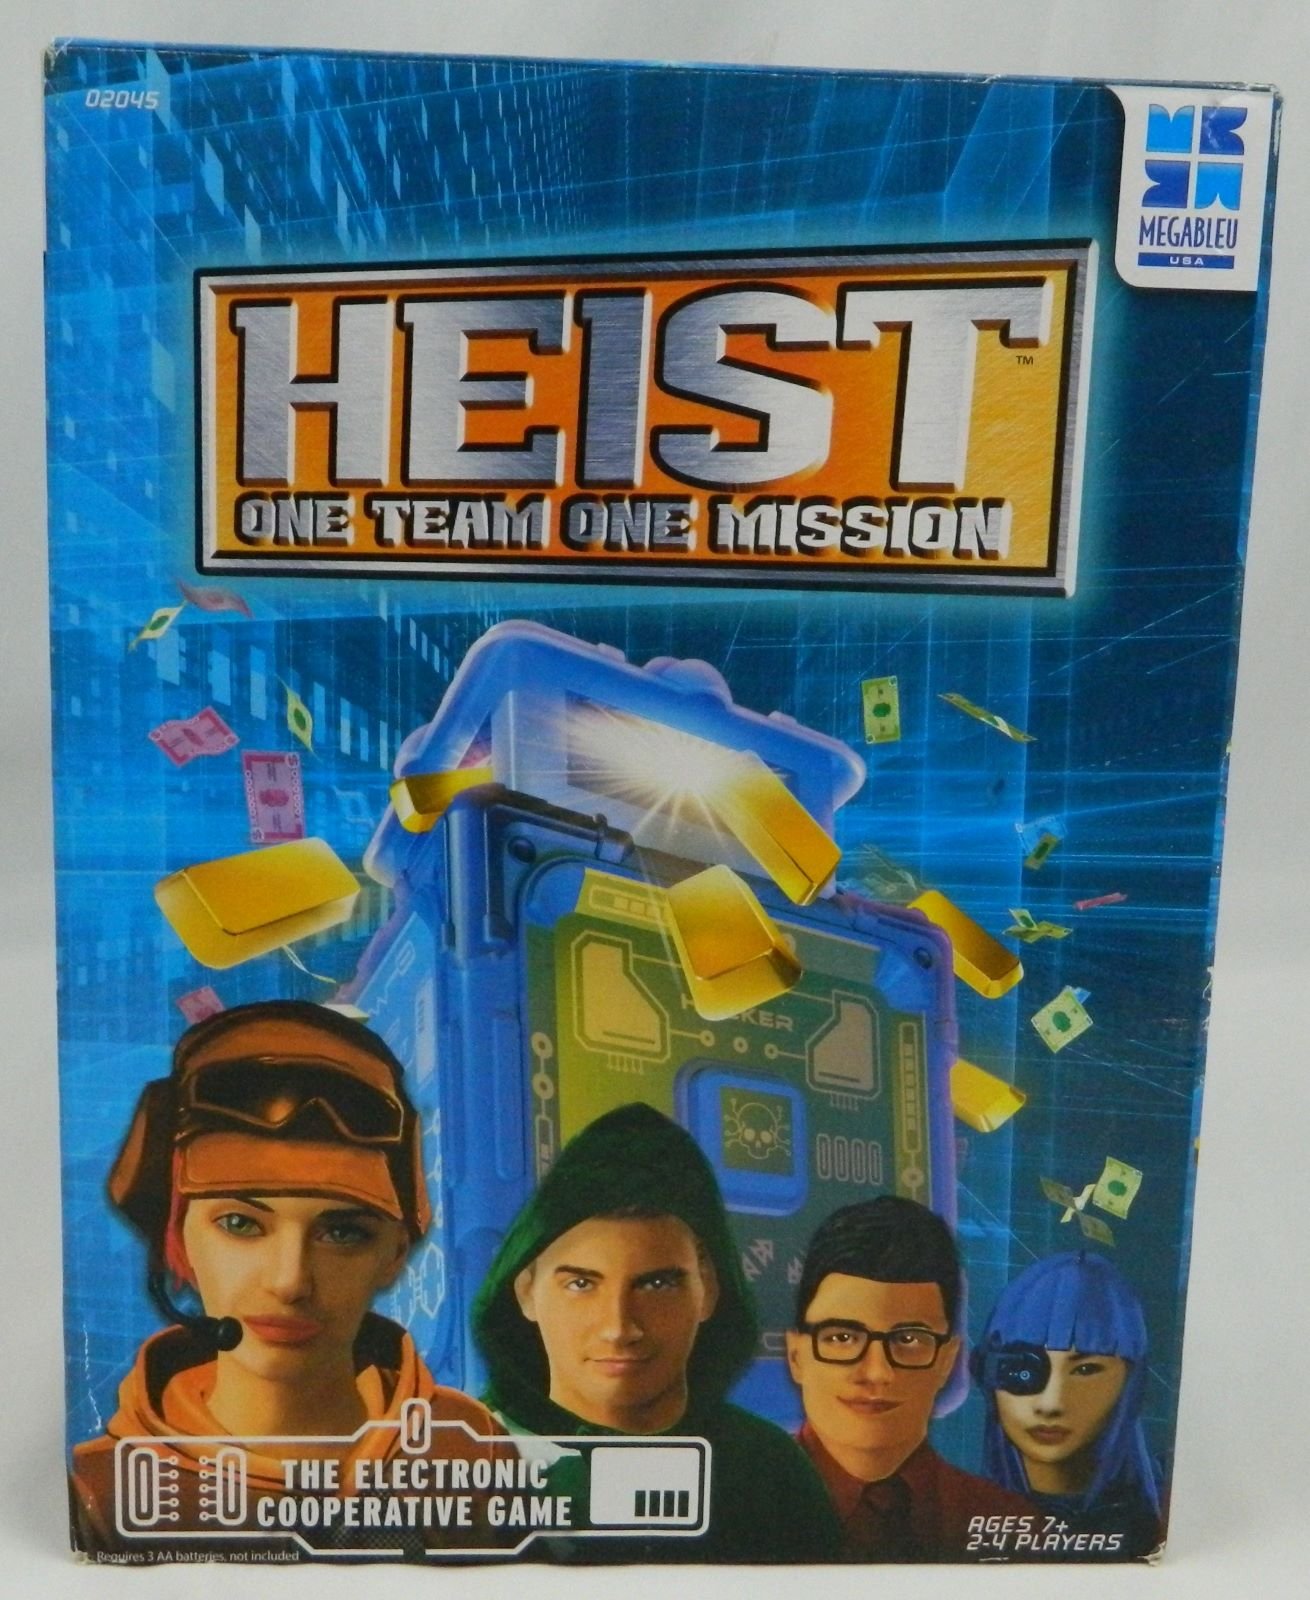 Heist: One Team, One Mission Board Game Review and Rules